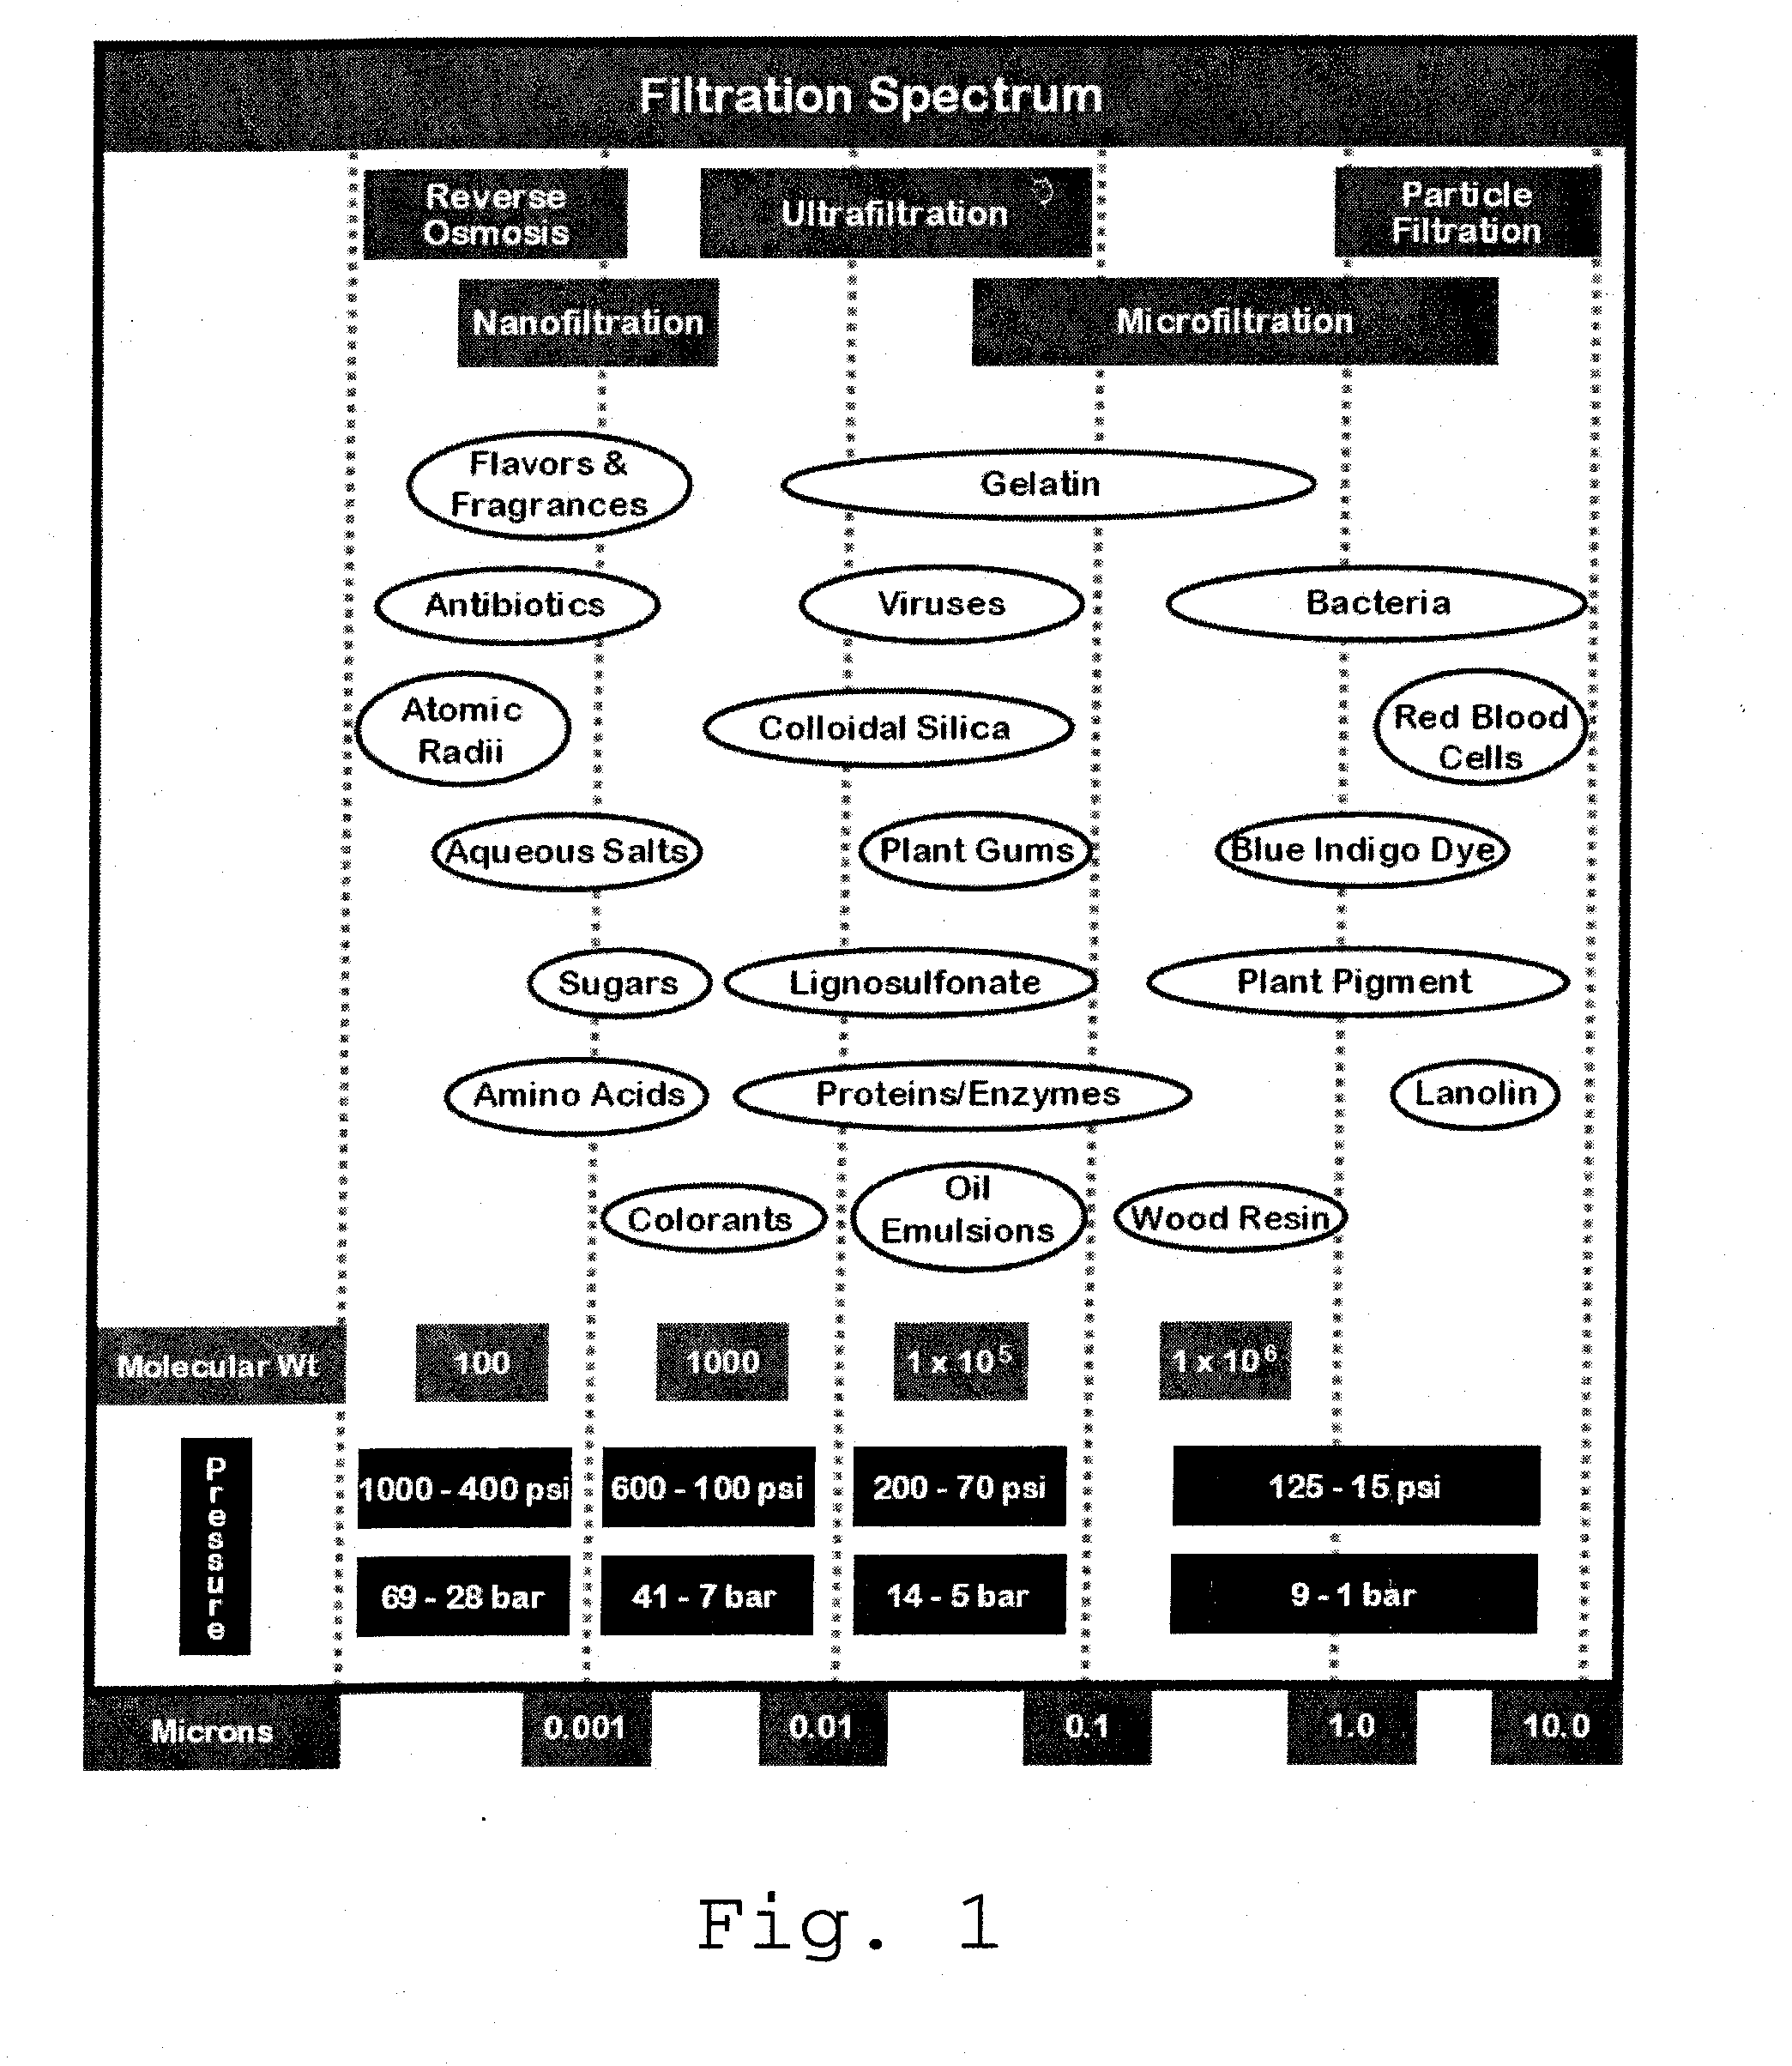 Tangential Flow Filtration Apparatuses, Systems, and Processes for the Separation of Compounds